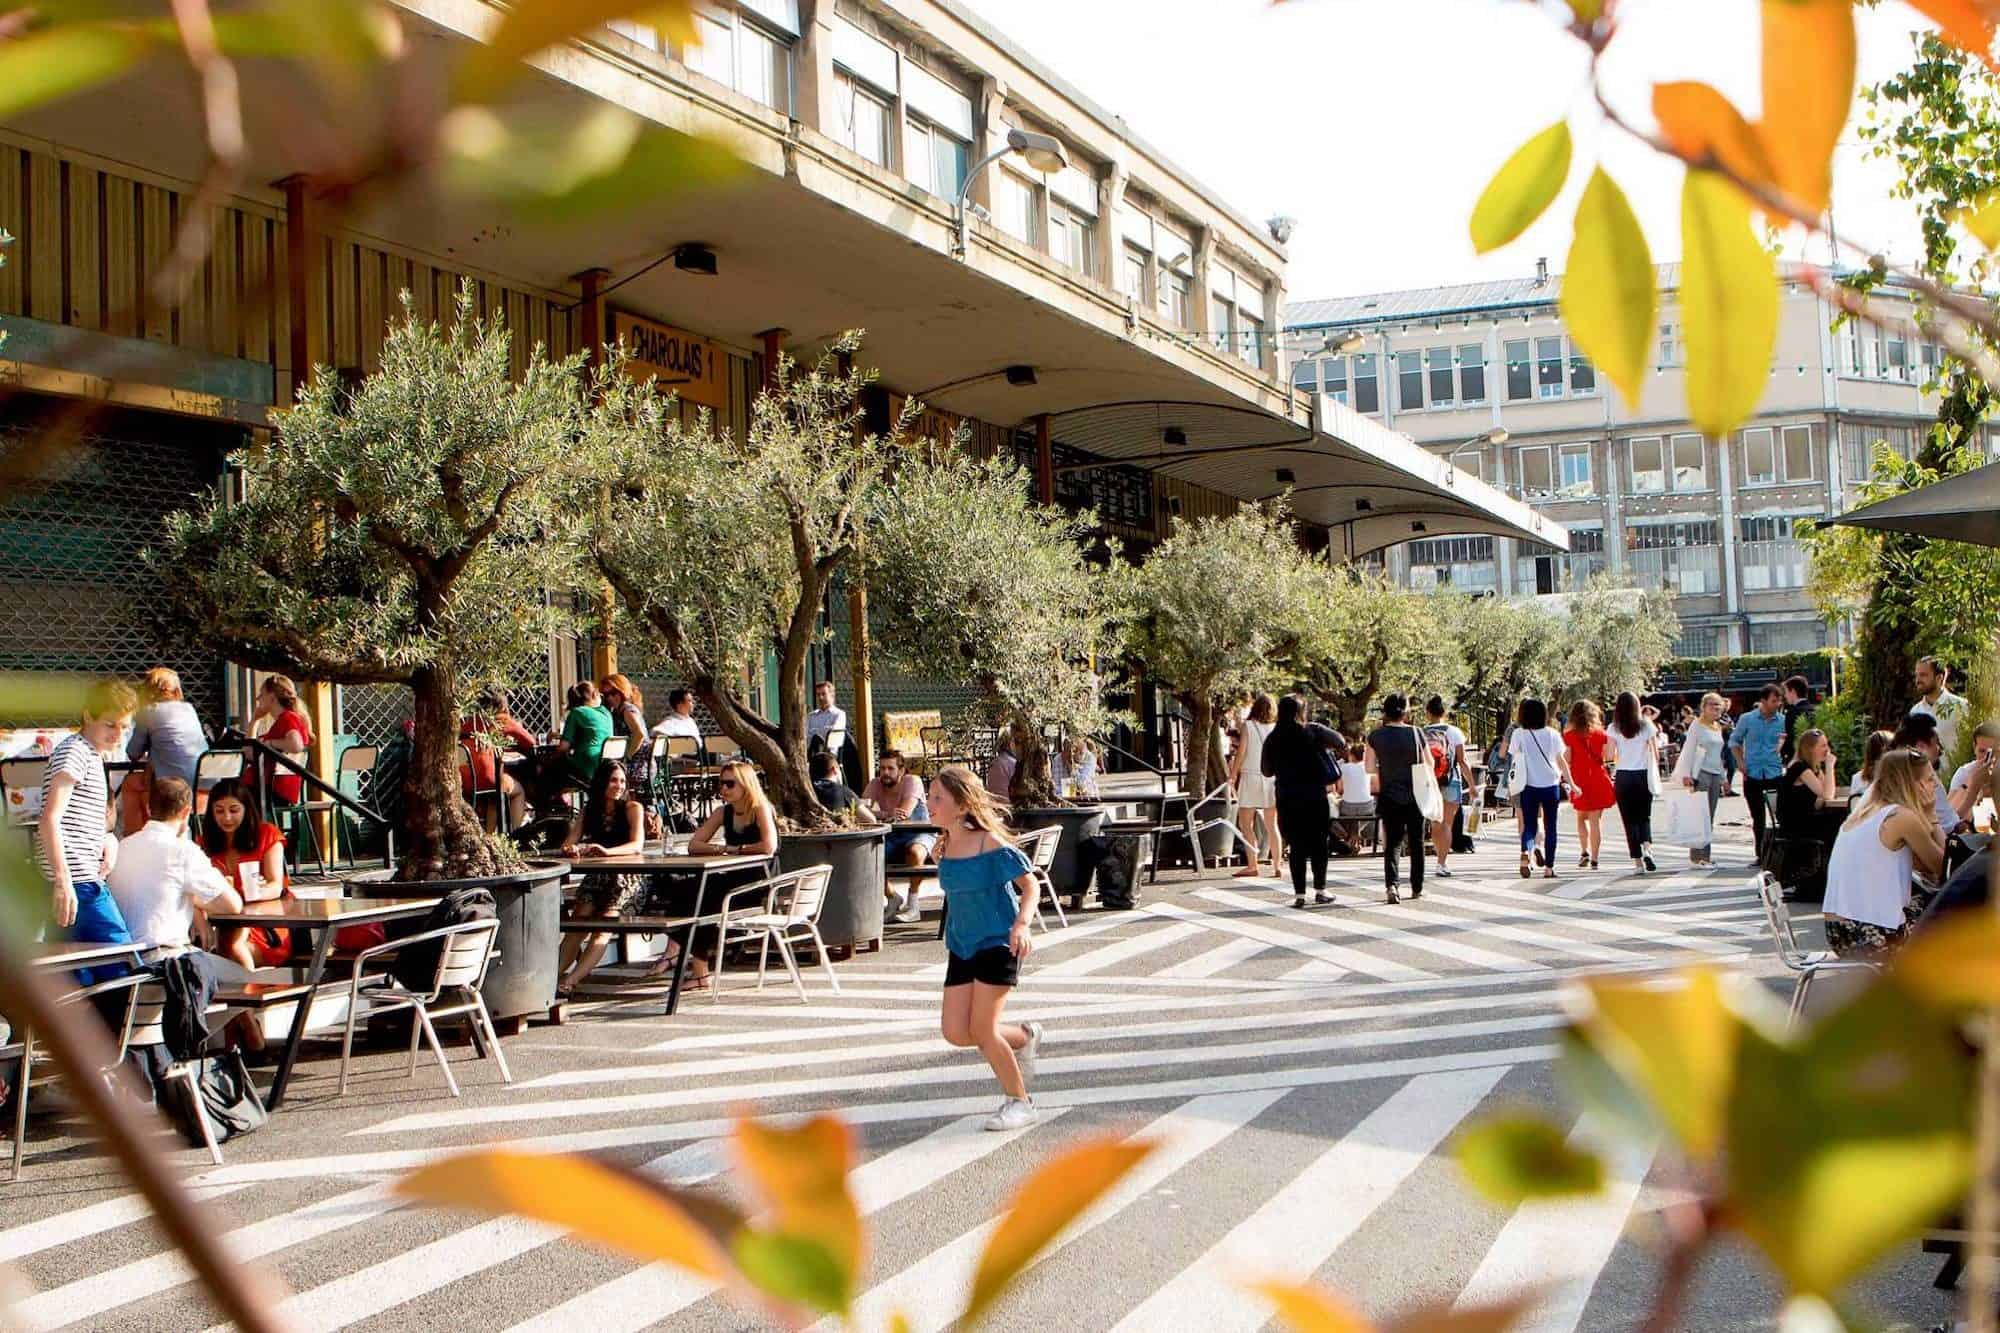 Ground Control is one of our favorite terraces in Paris in summer as it has a large outdoor space with potted olive trees and plenty of food options.